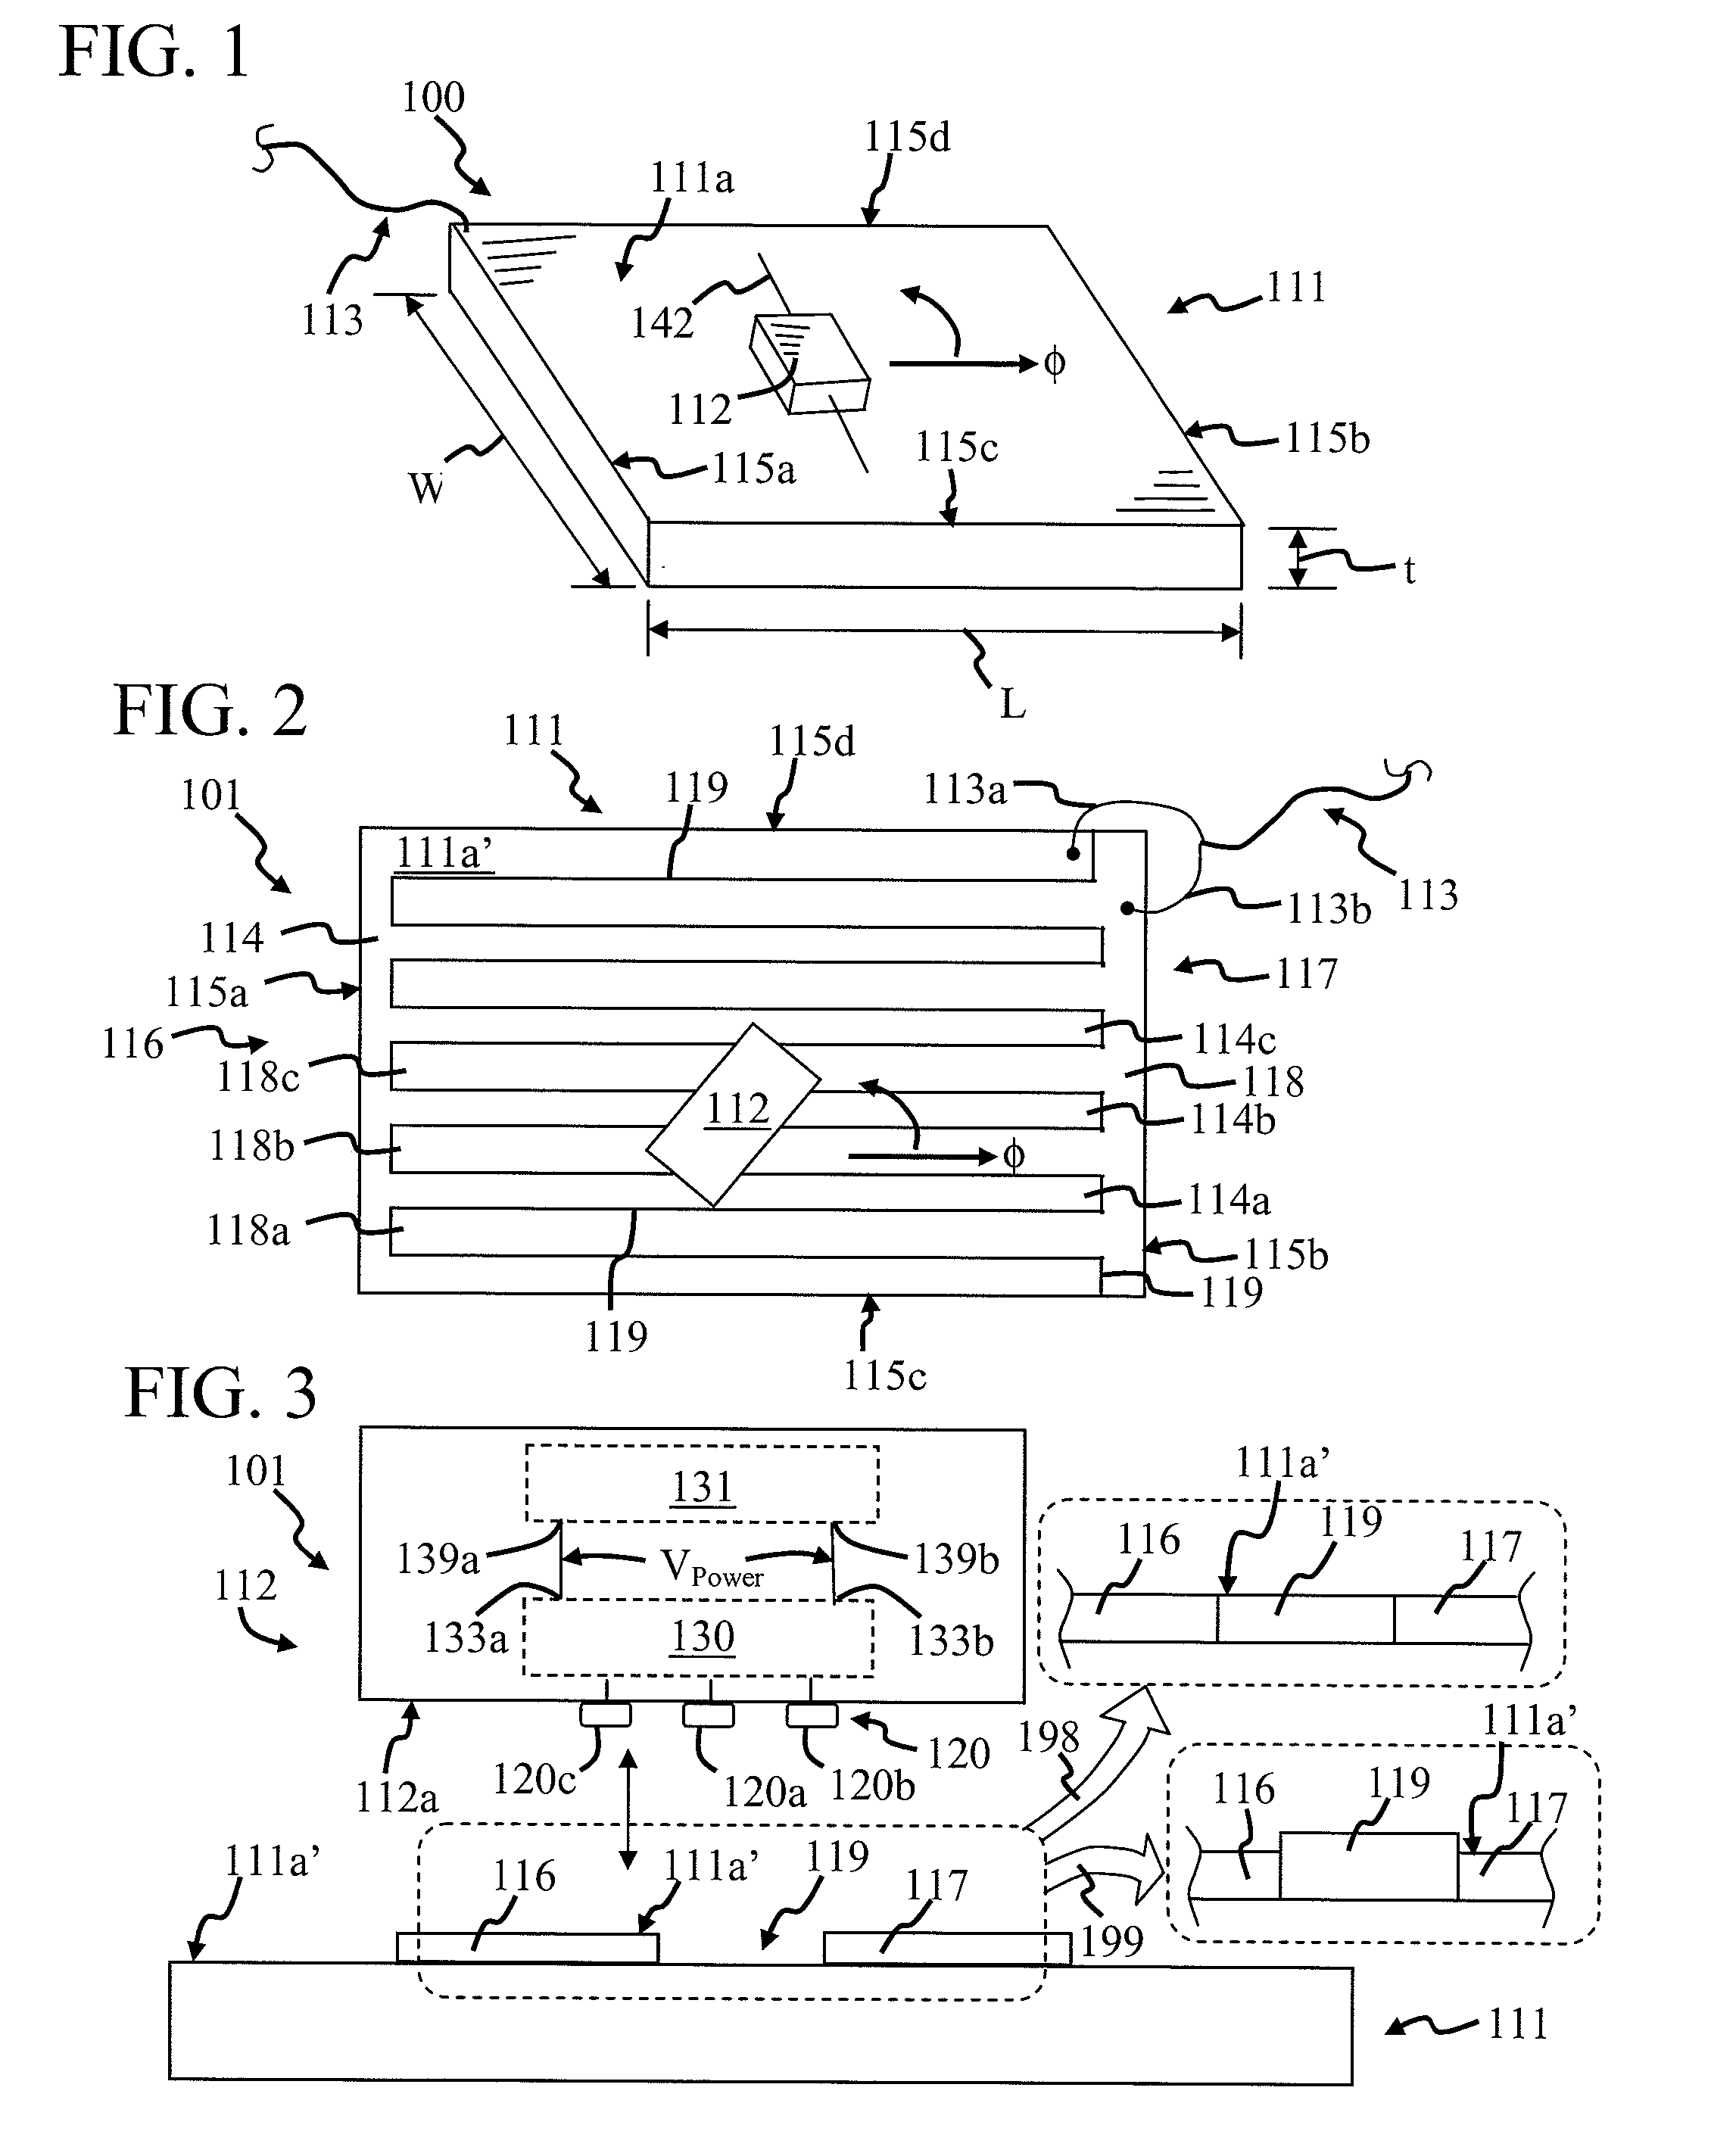 System and method for providing power to an electronic device